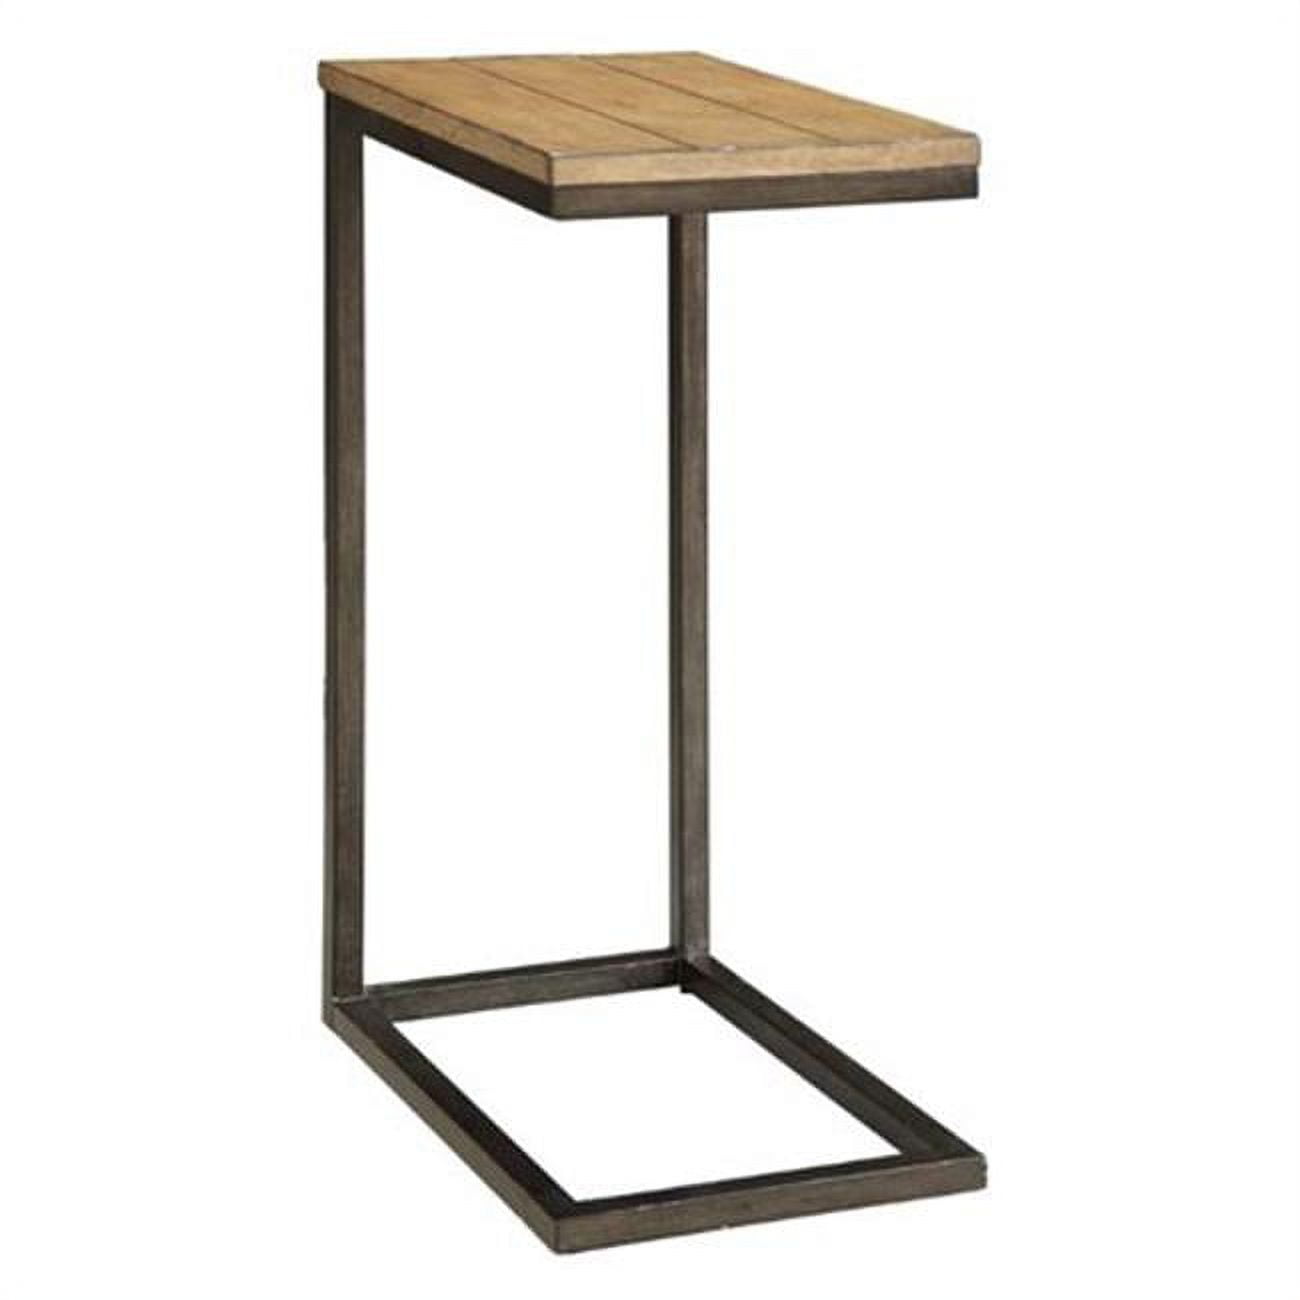 Cf1610ho Aggie Computer Tray Table, Harvest Oak & Aged Iron - 10 X 16 X 26 In.